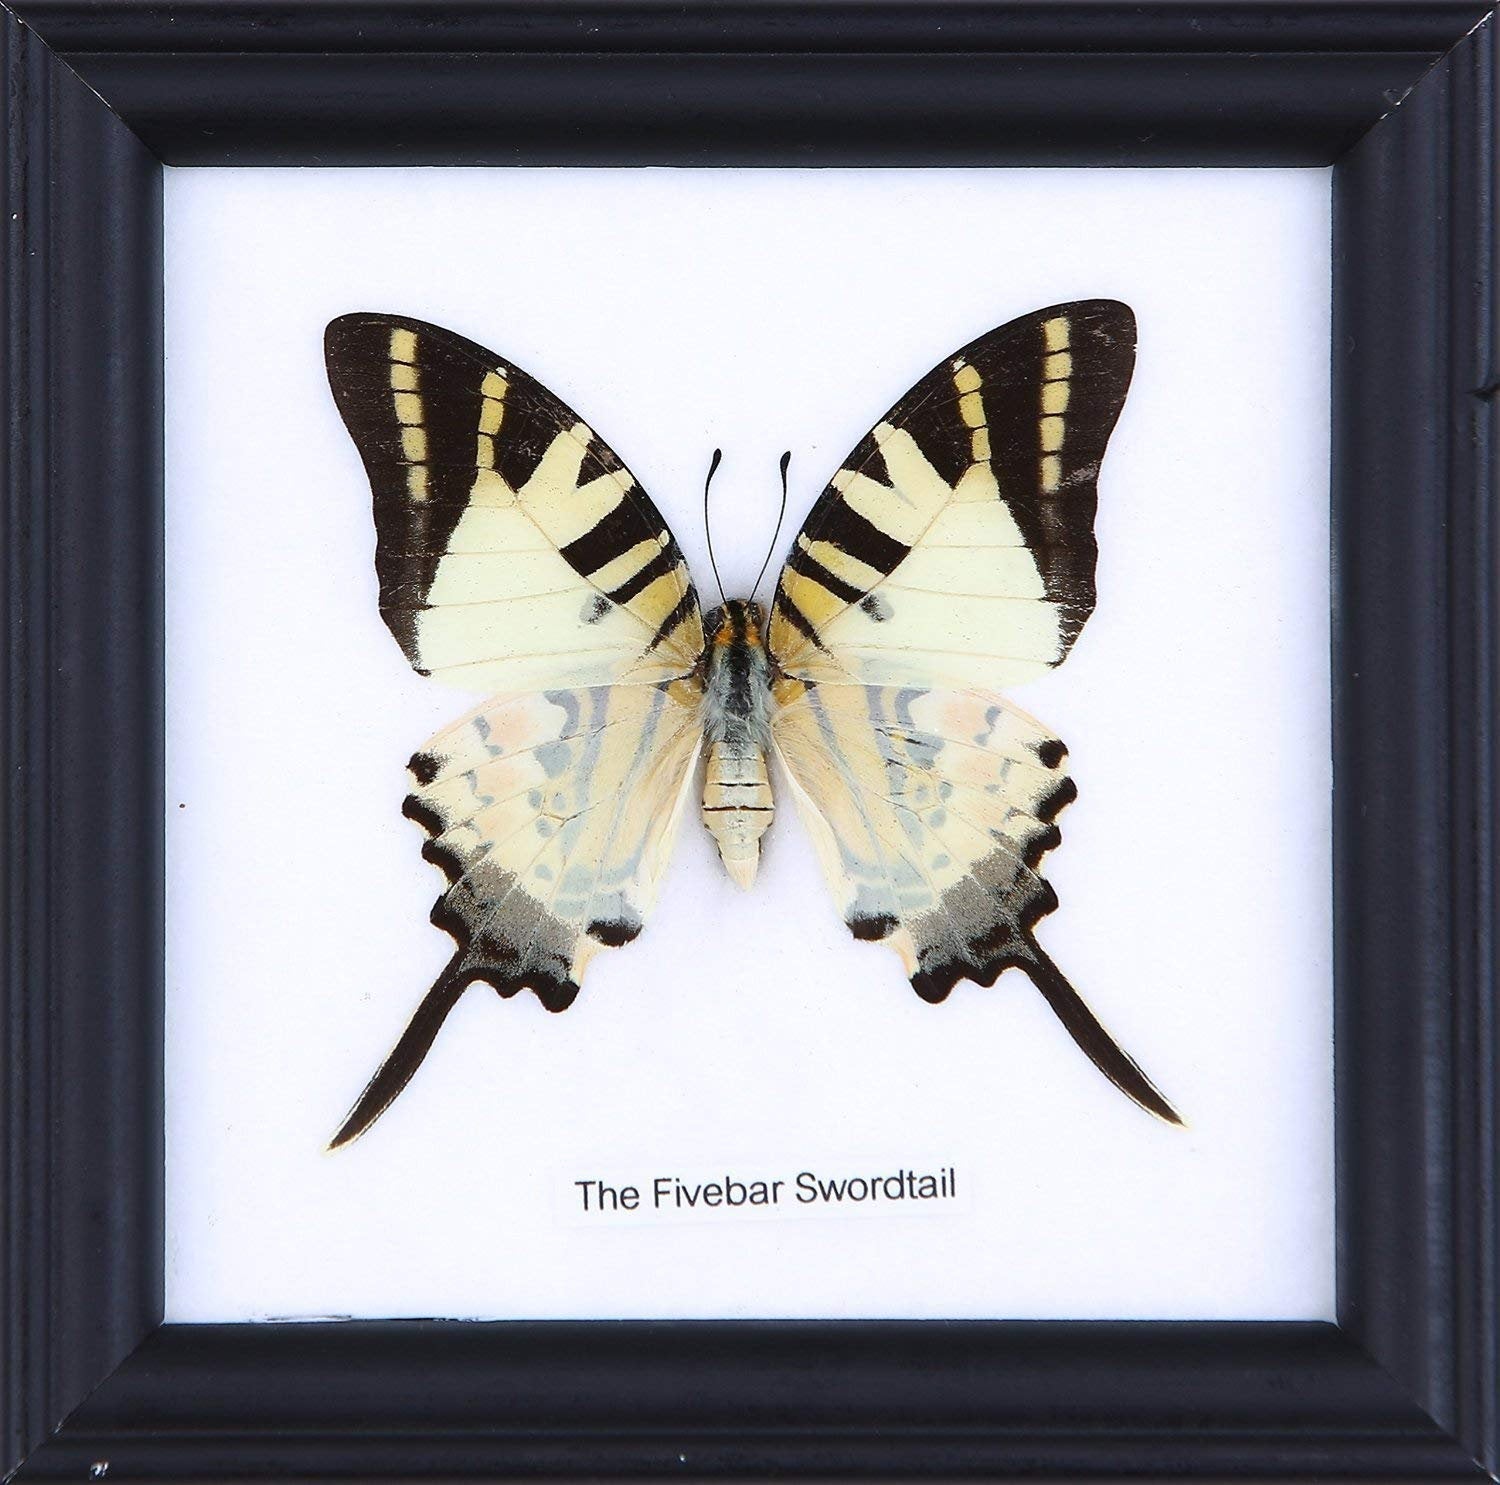 The Five-bar Swordtail (Graphium antiphates) | Real Butterfly Mounted Under Glass, Wall Hanging Home Décor Framed 5 x 5 In. Gift Boxed